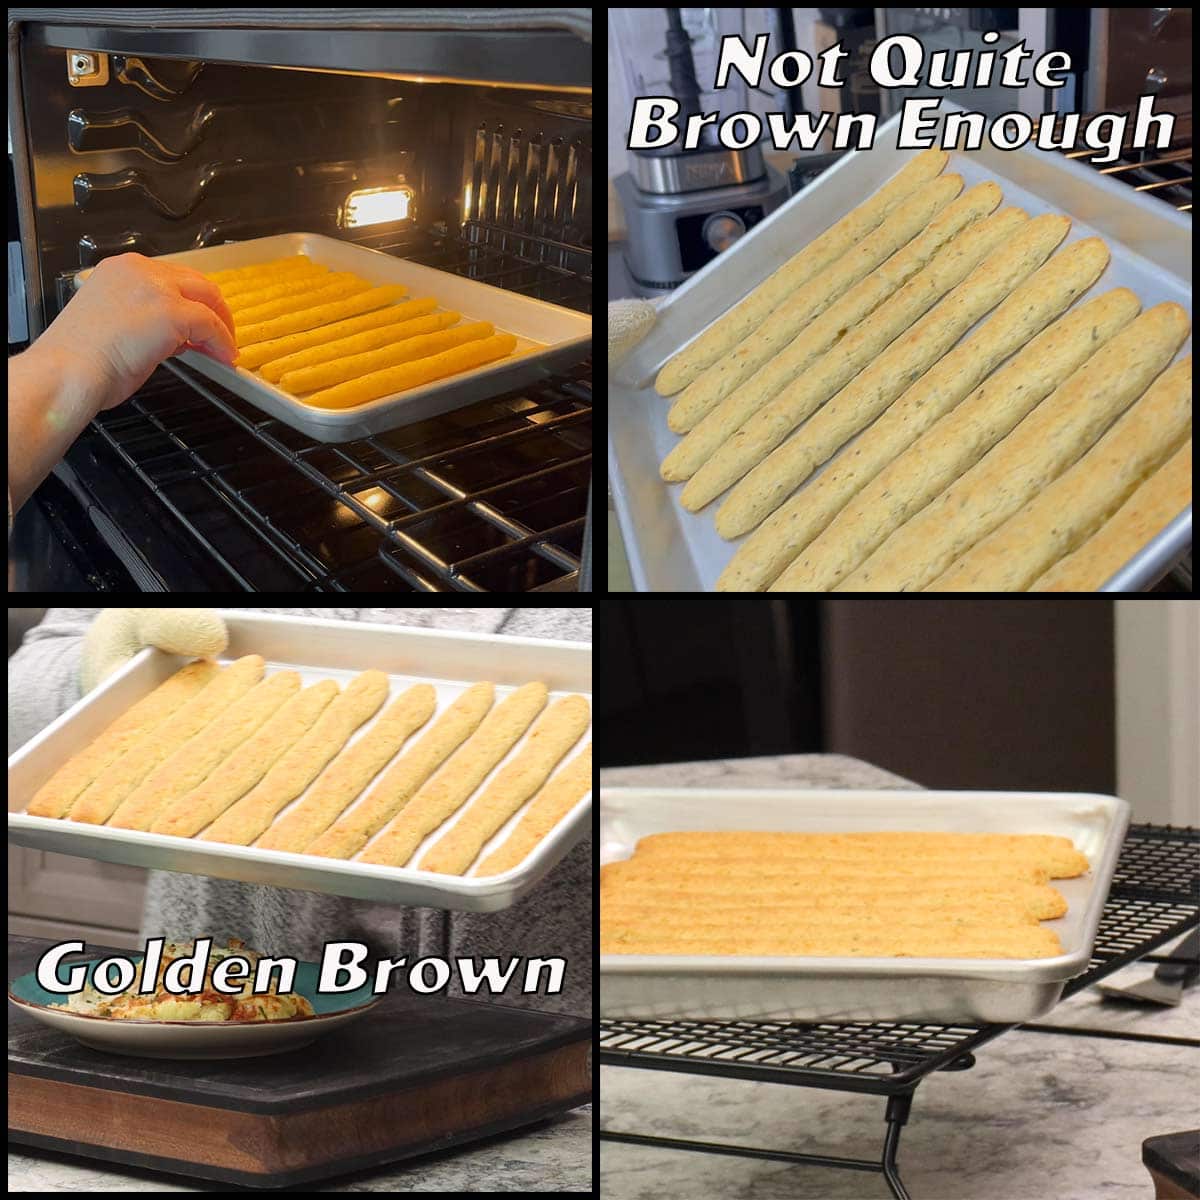 showing the breadsticks too light in color and after baking a few more minutes showing them golden brown.